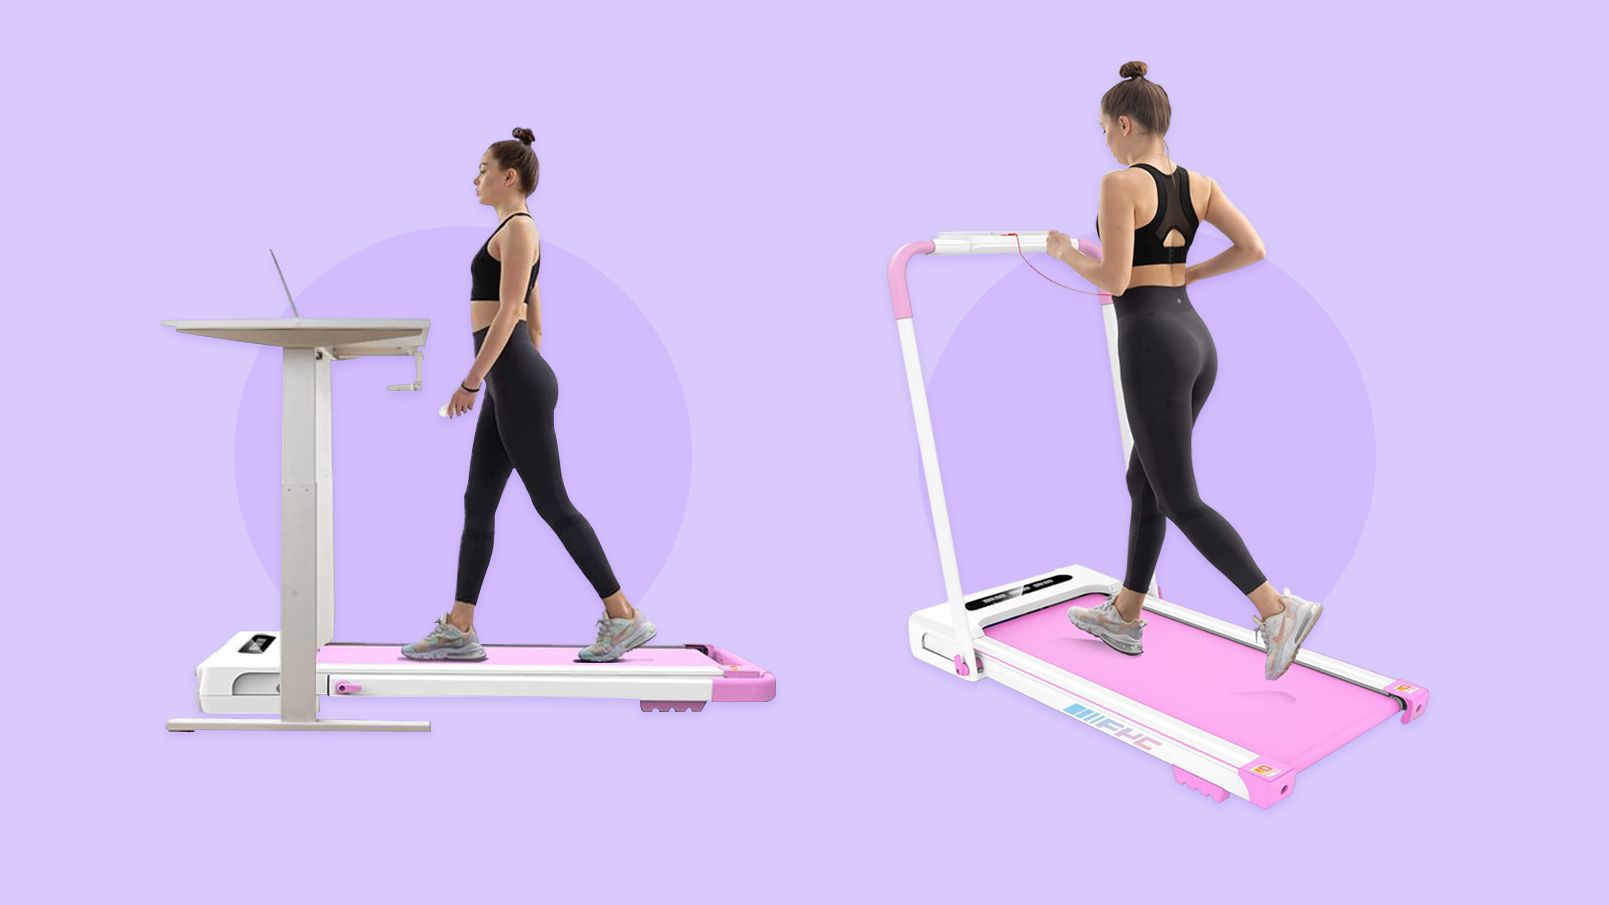 Honest Walking Pad Treadmill Review - Worth it or Not?